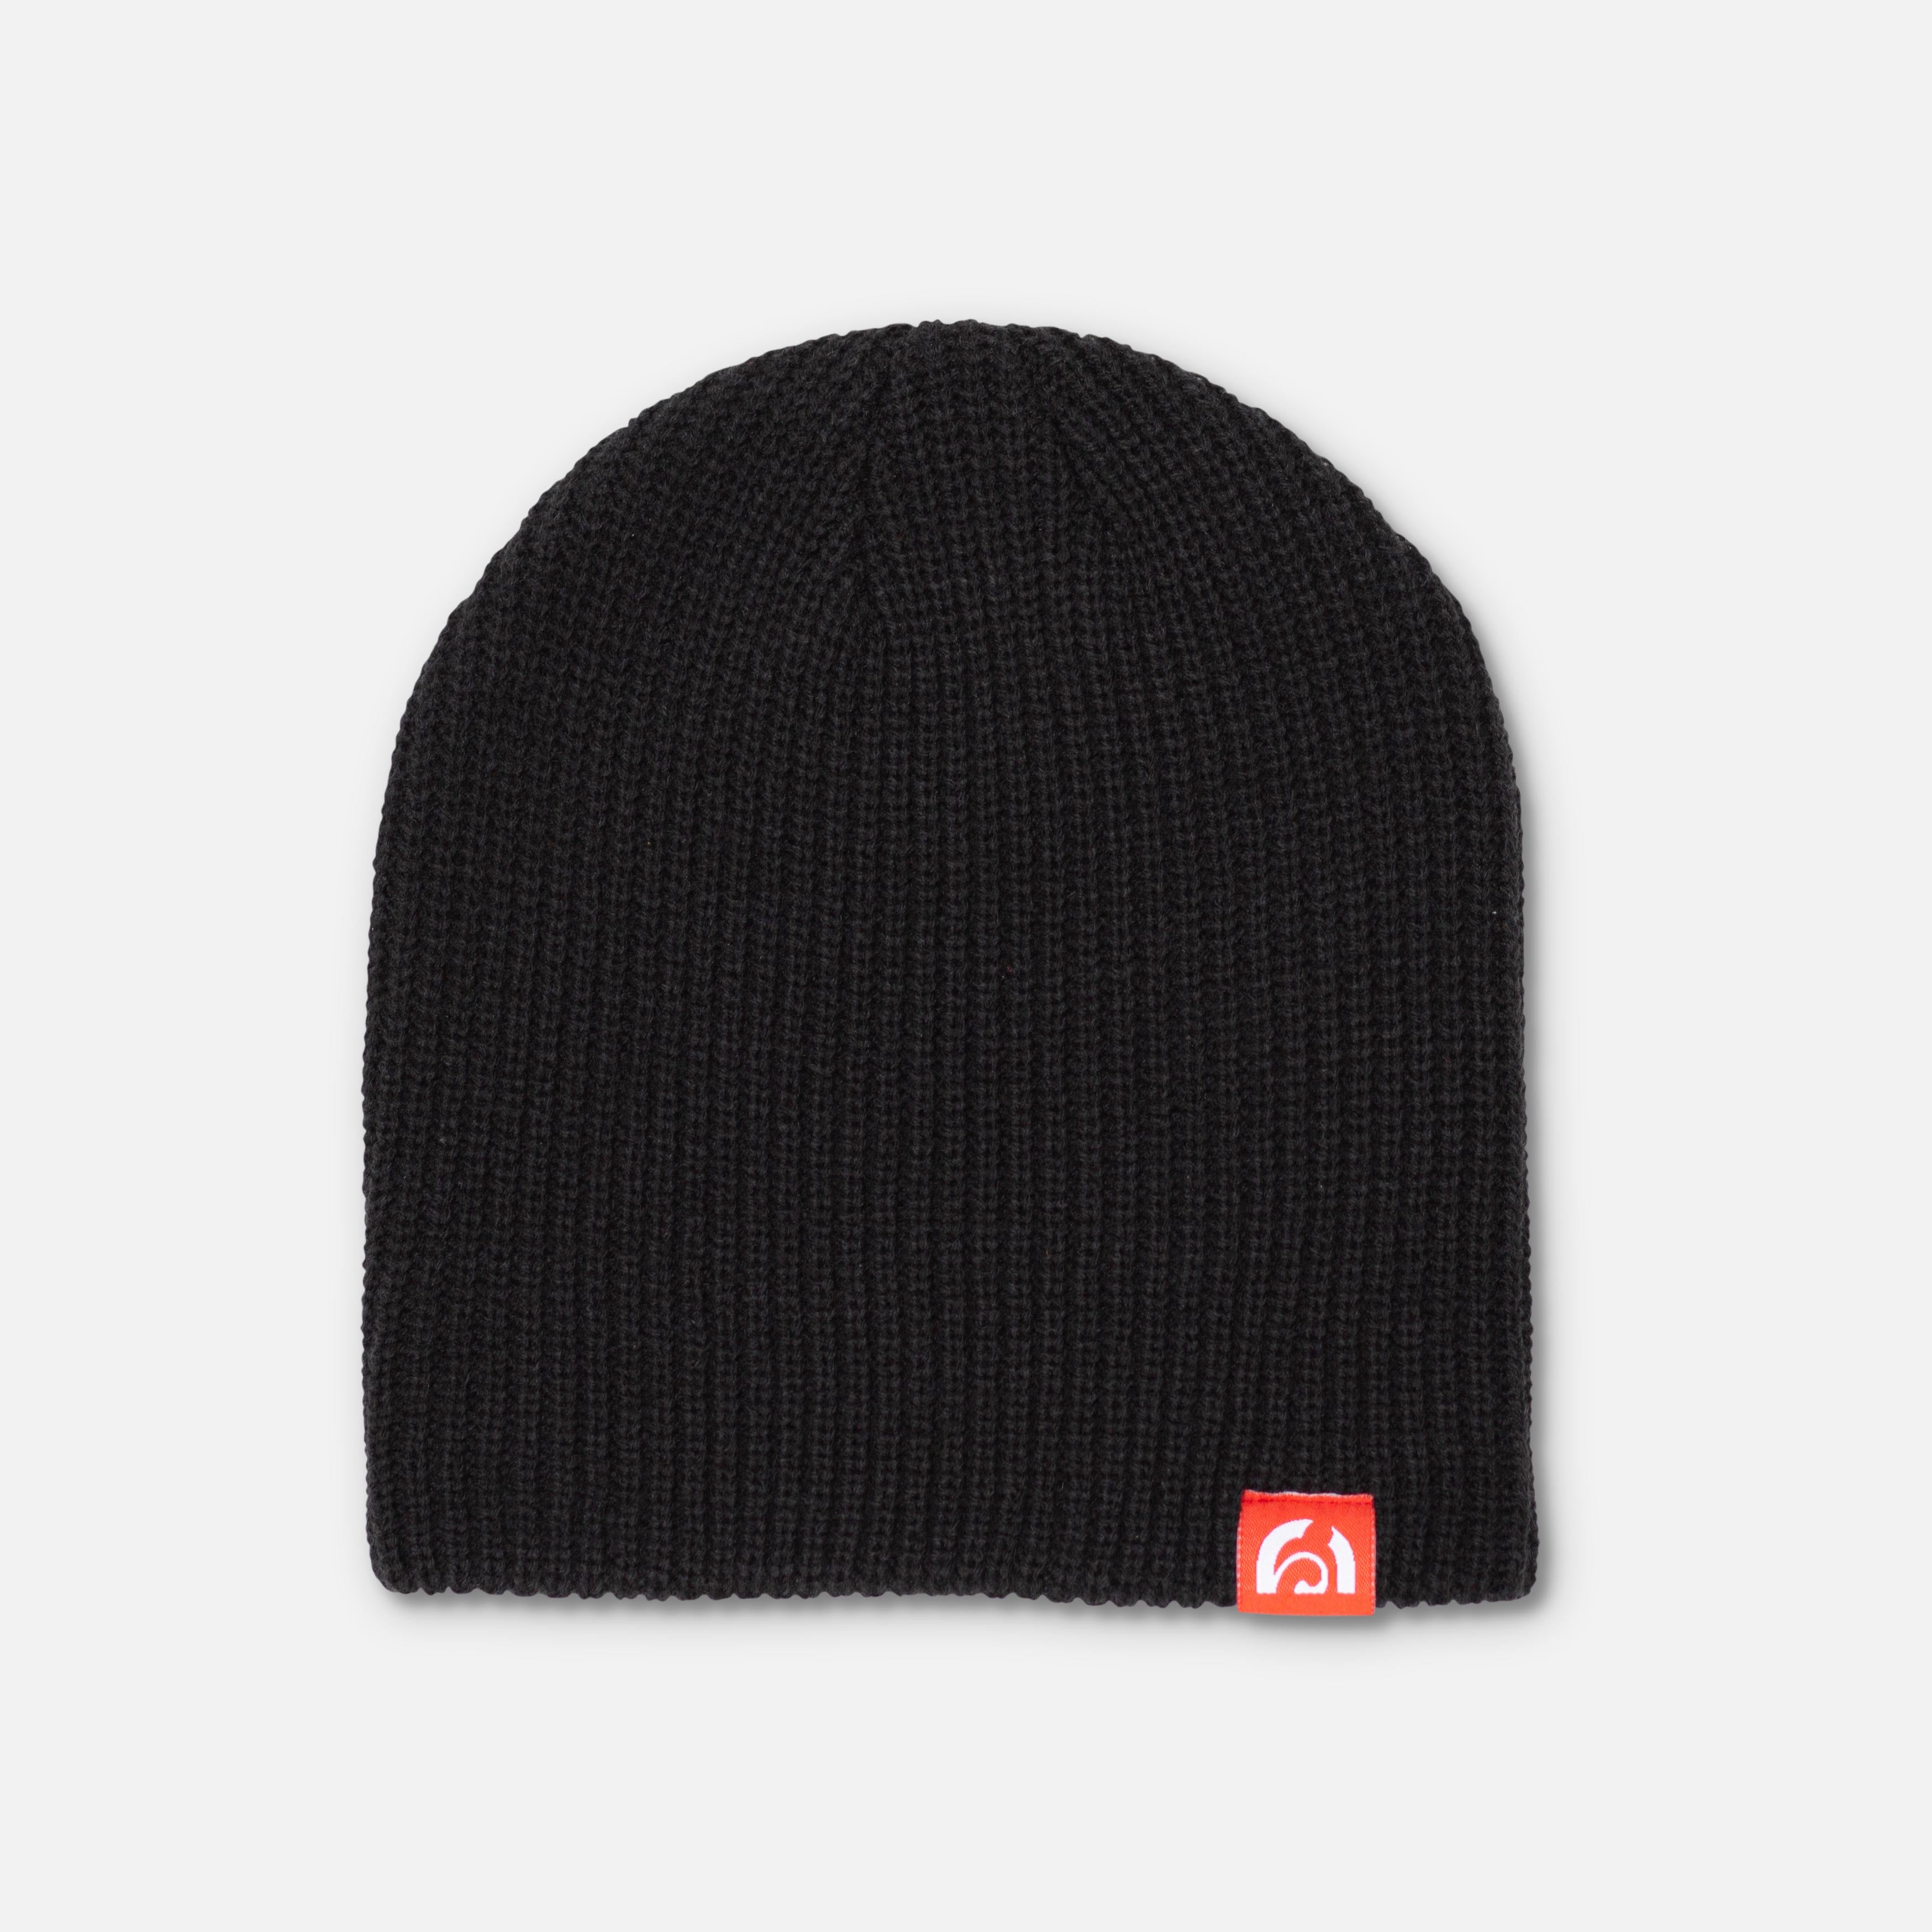 ARCH Motorcycle Beanie